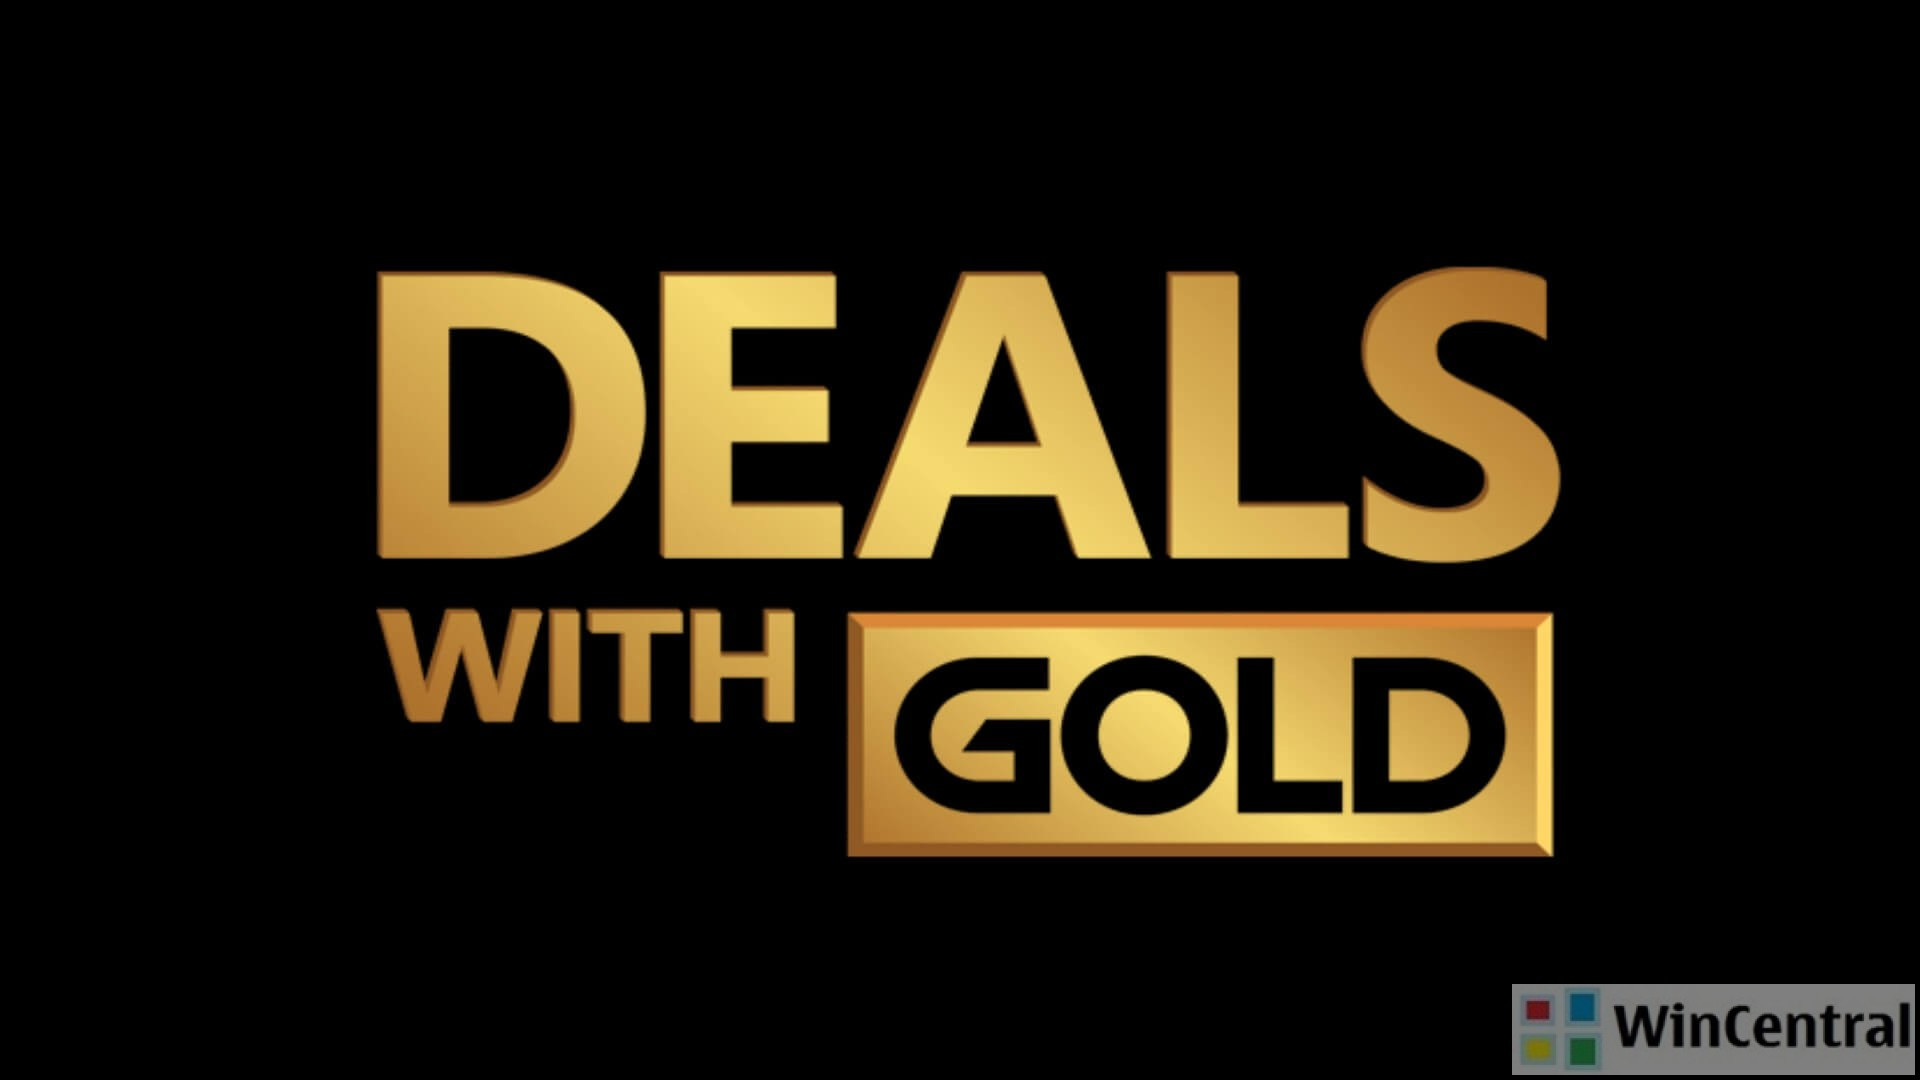 Deals with Gold semaine 25